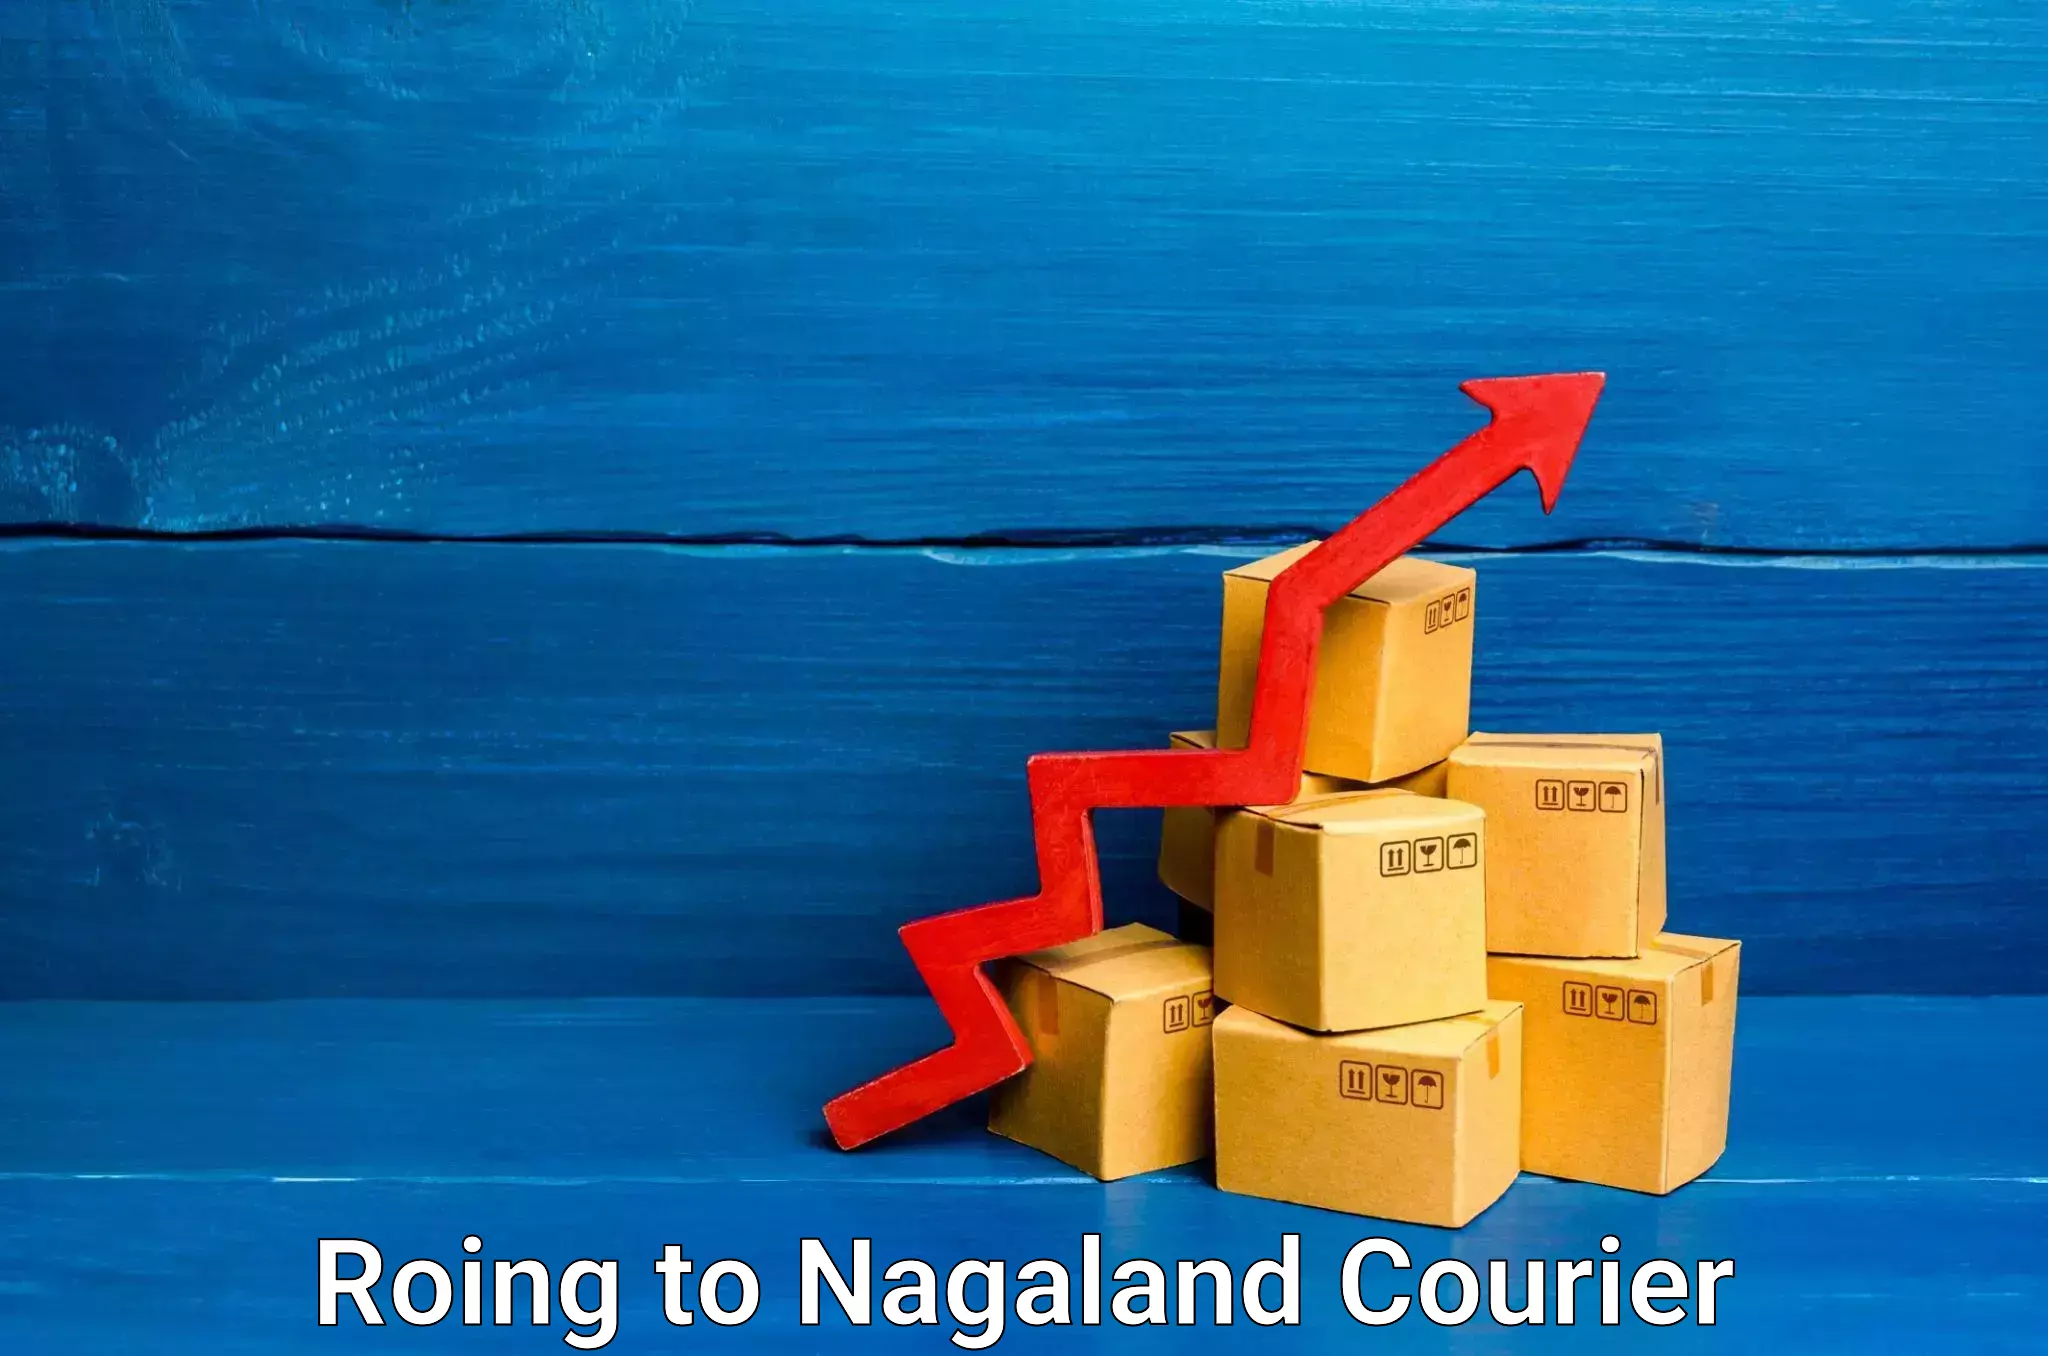 Global courier networks Roing to Nagaland